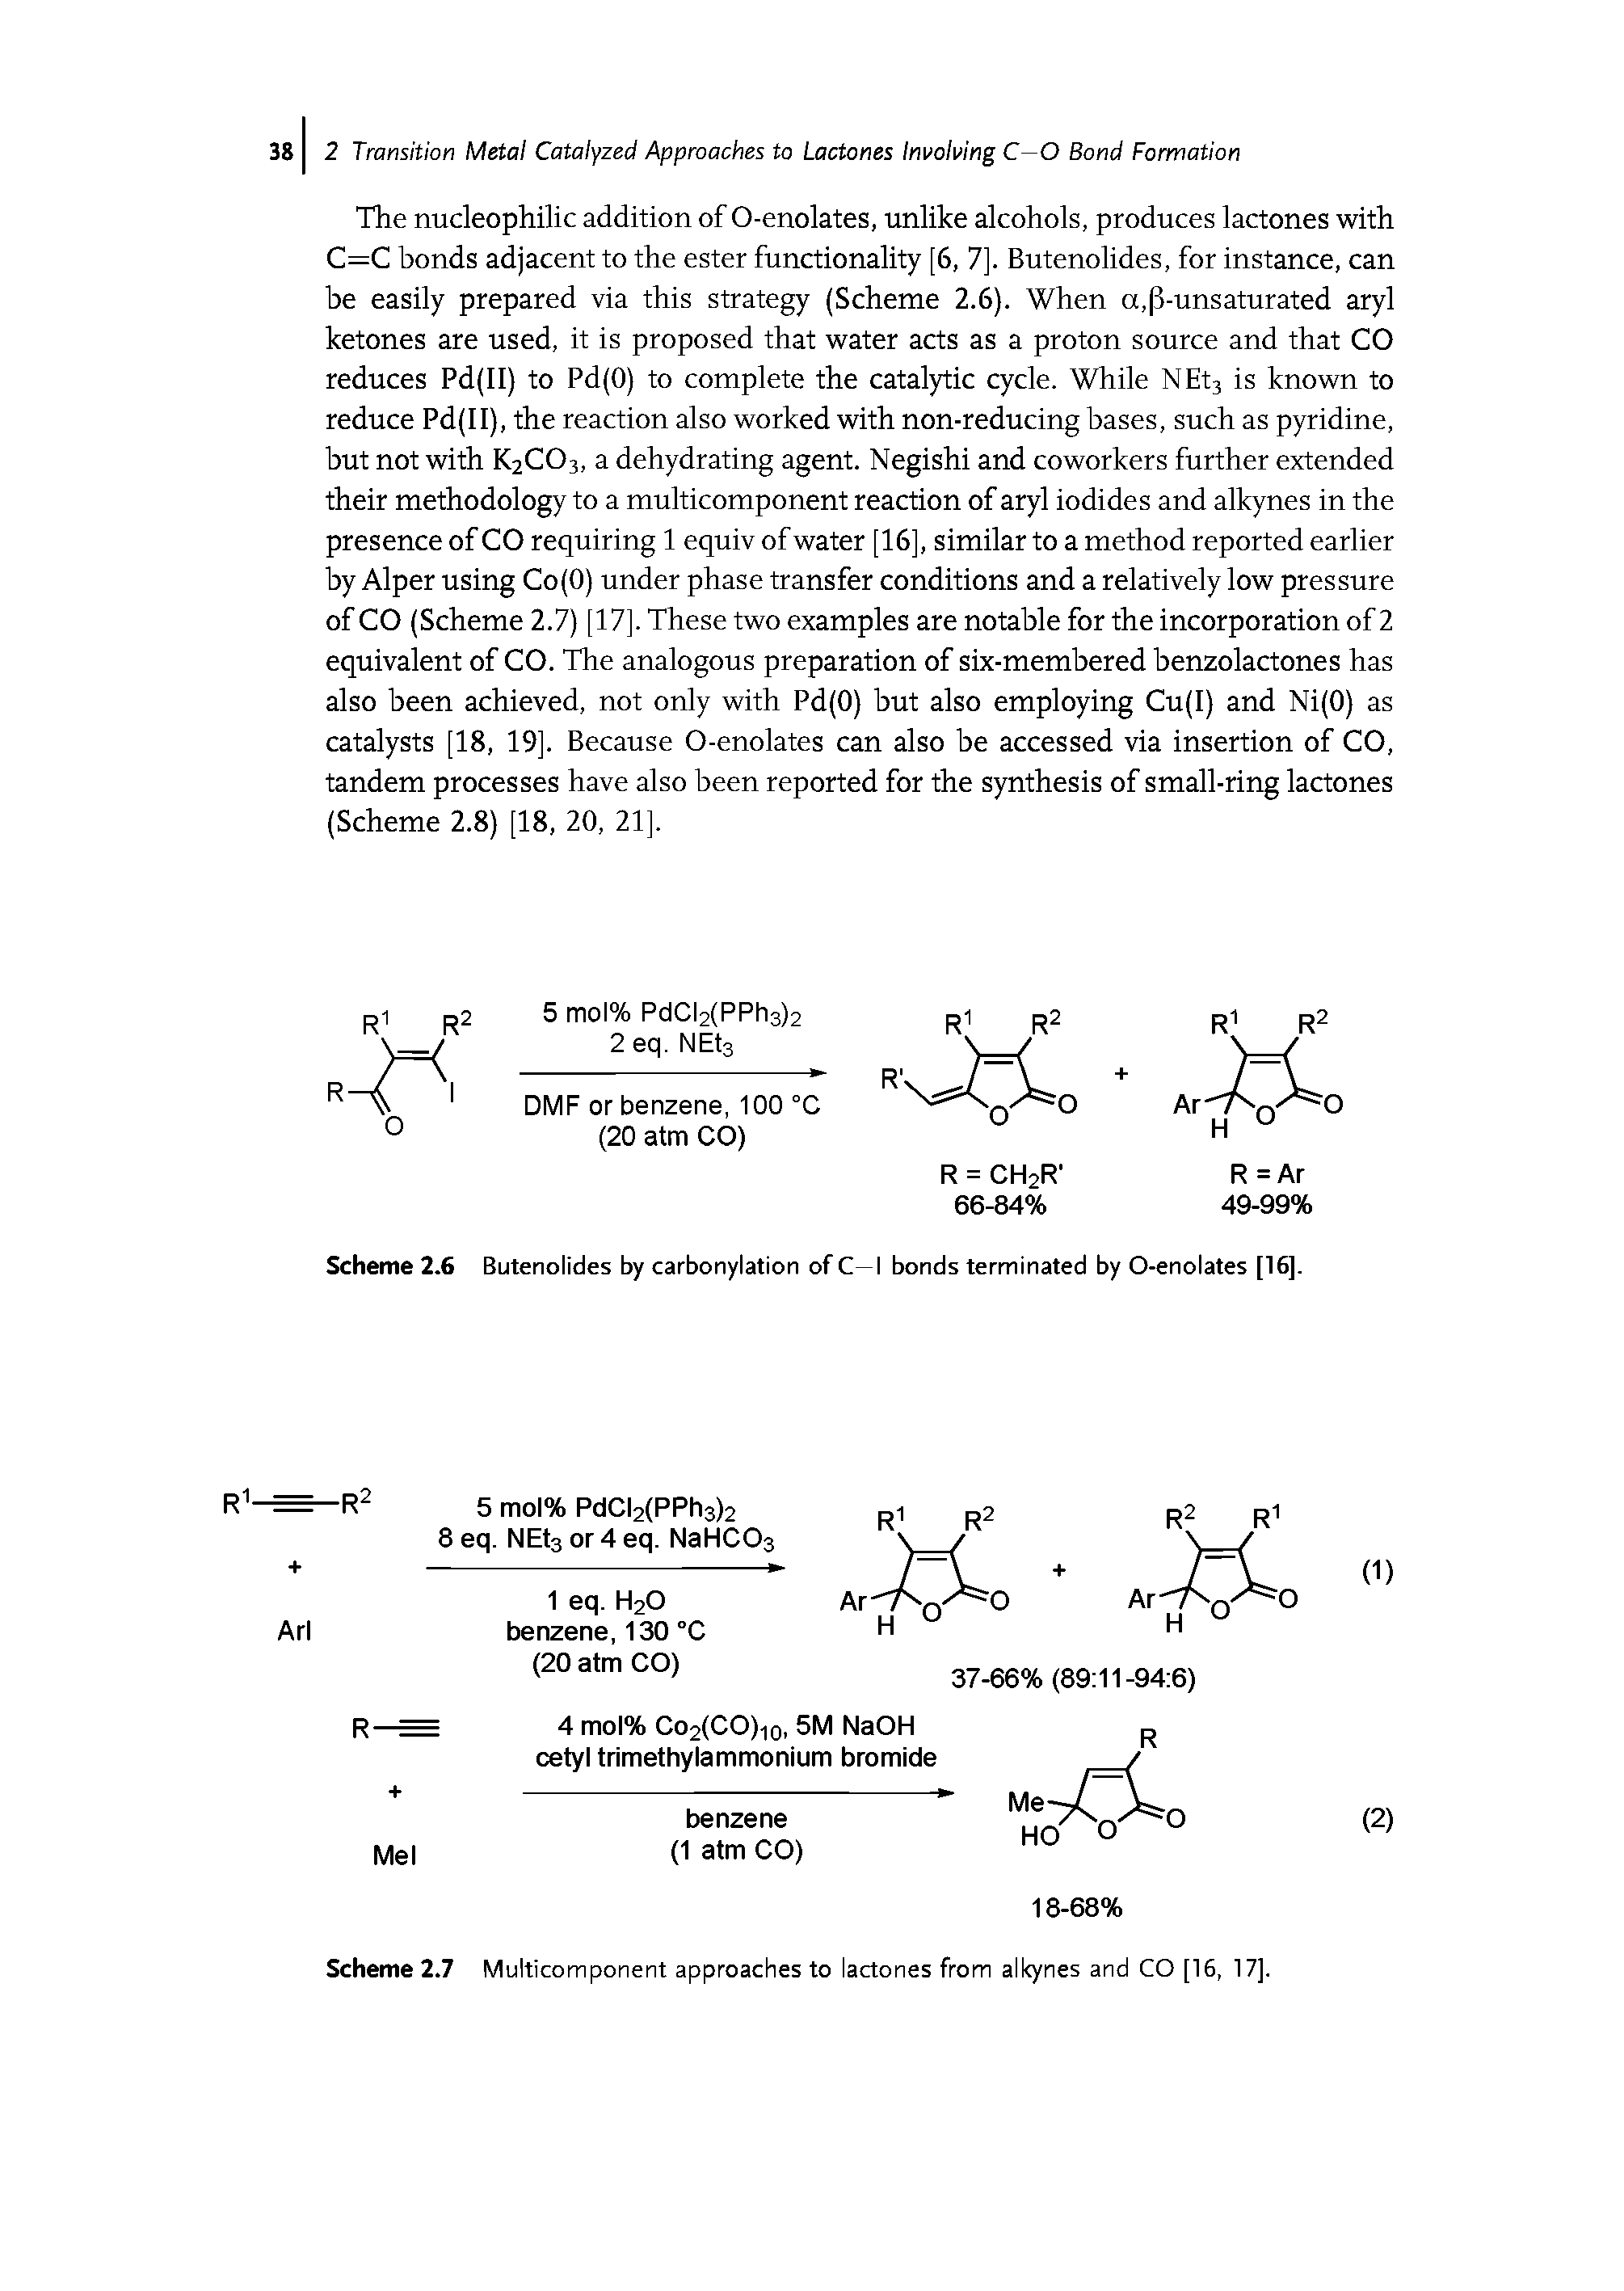 Scheme 2.7 Multicomponent approaches to lactones from alkynes and CO [16, 17].